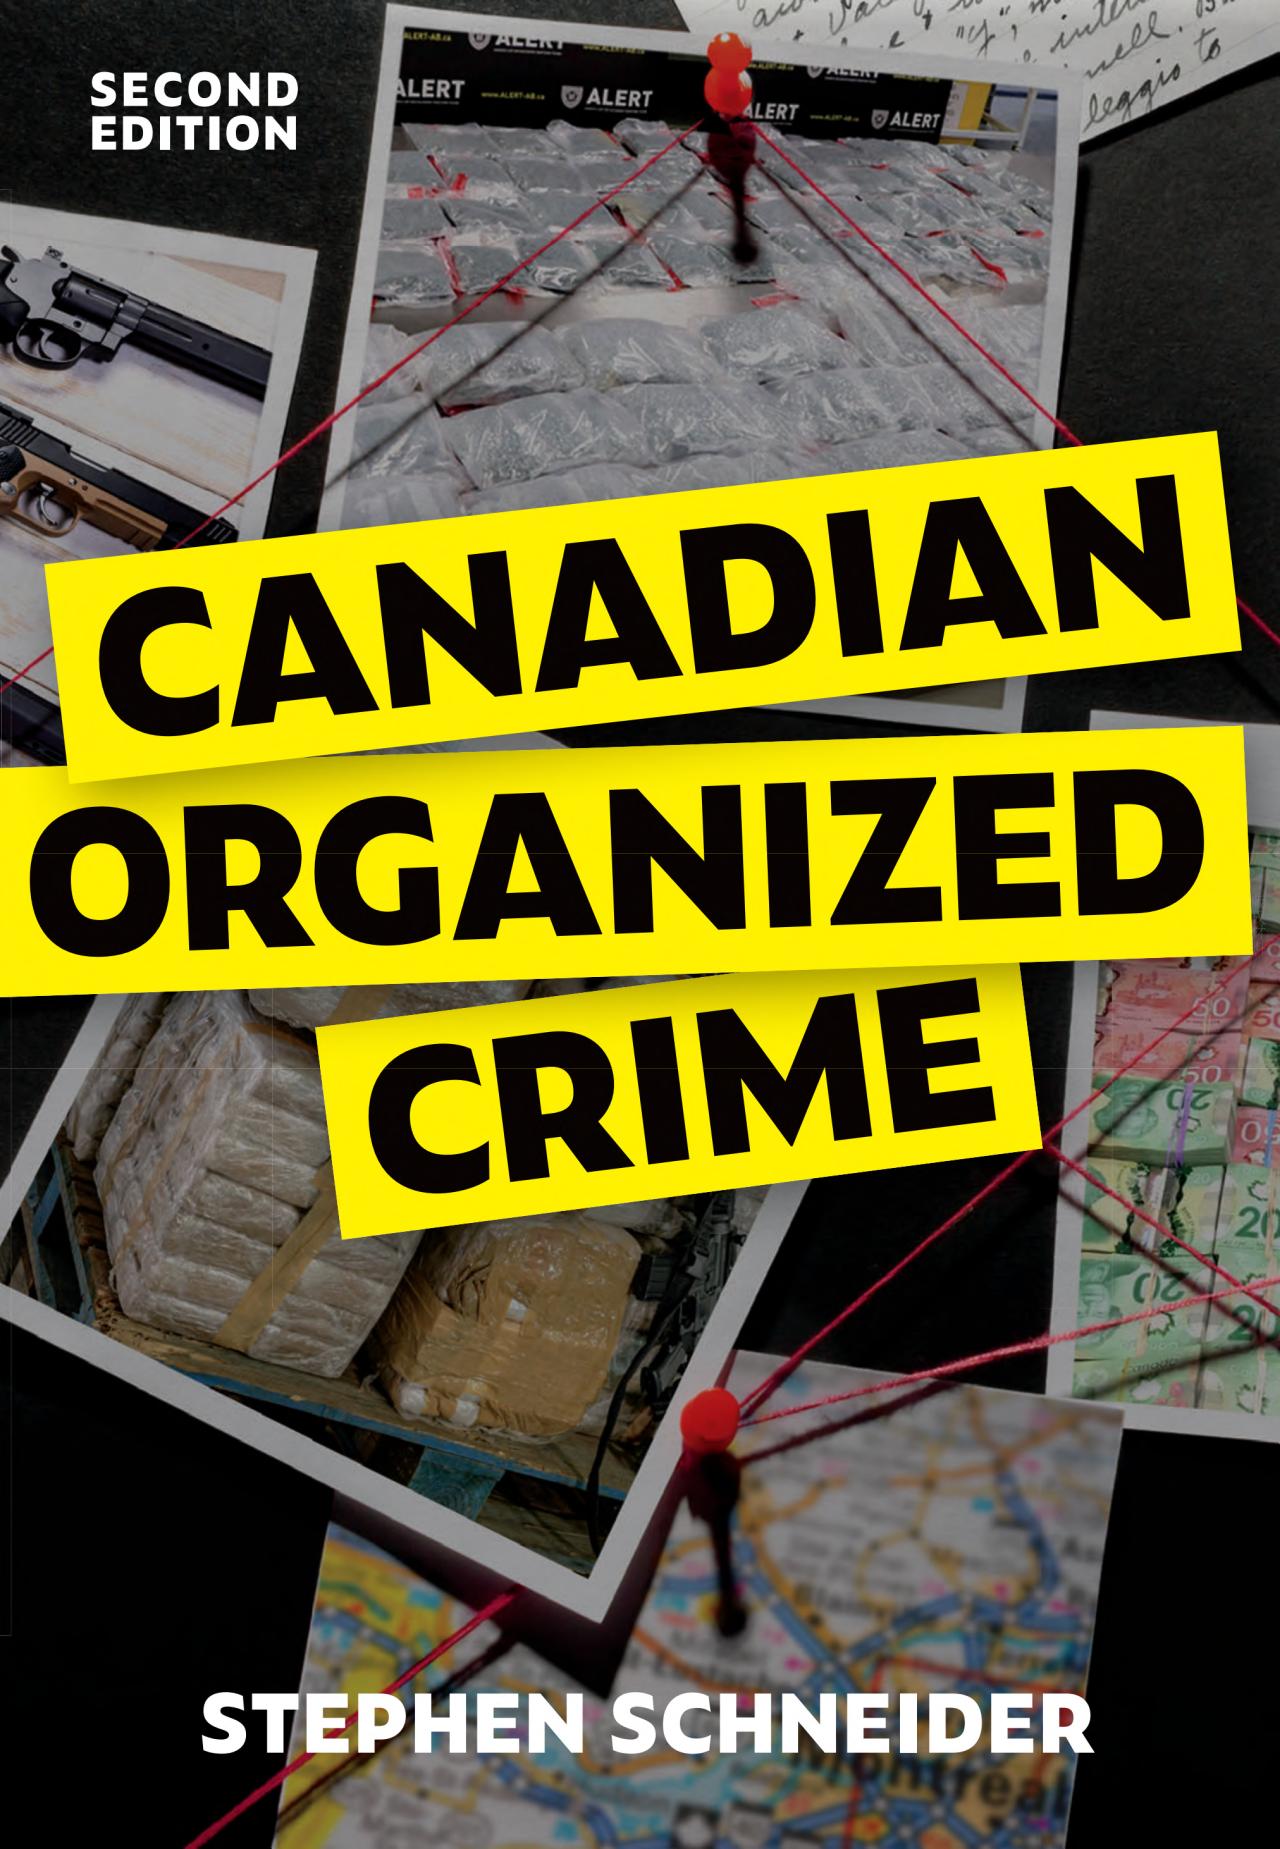 Canadian Organized Crime, Second Edition by Stephen Schneider